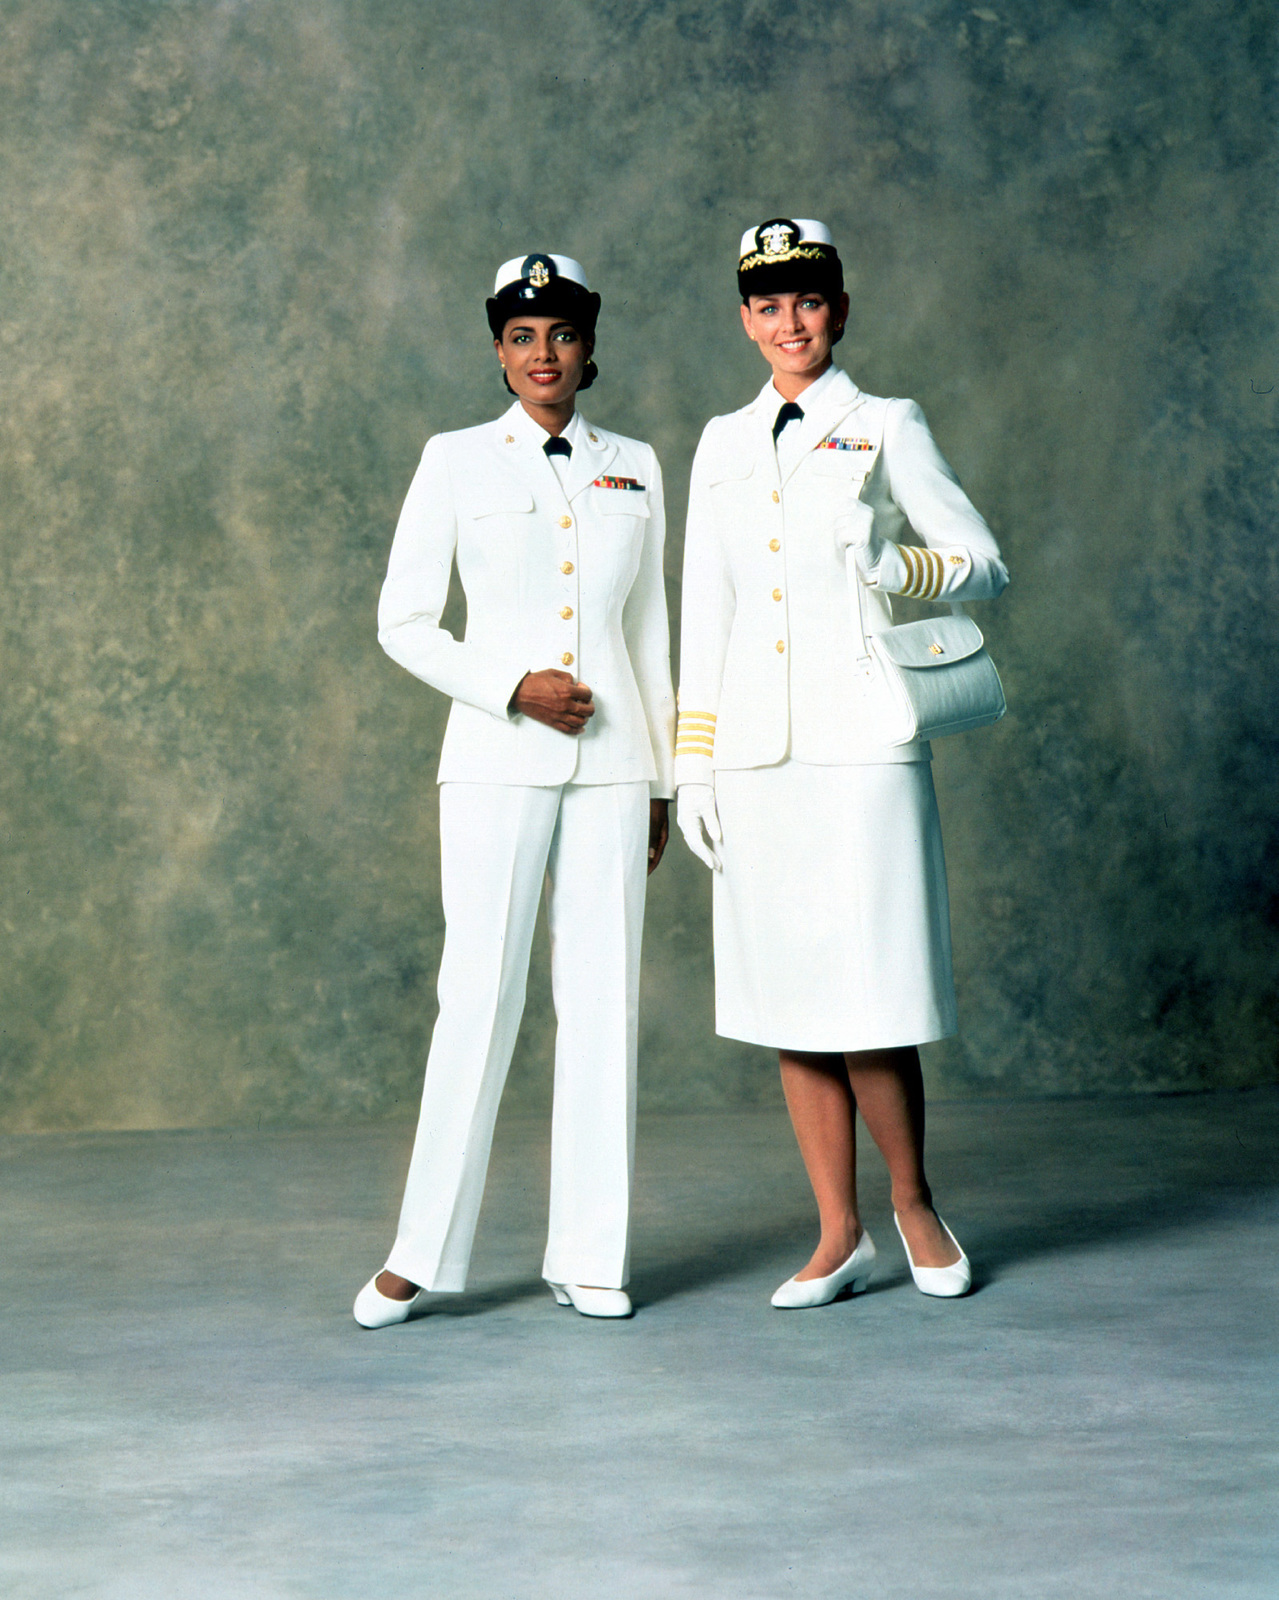 Right, Service Dress White uniform for women officers. 